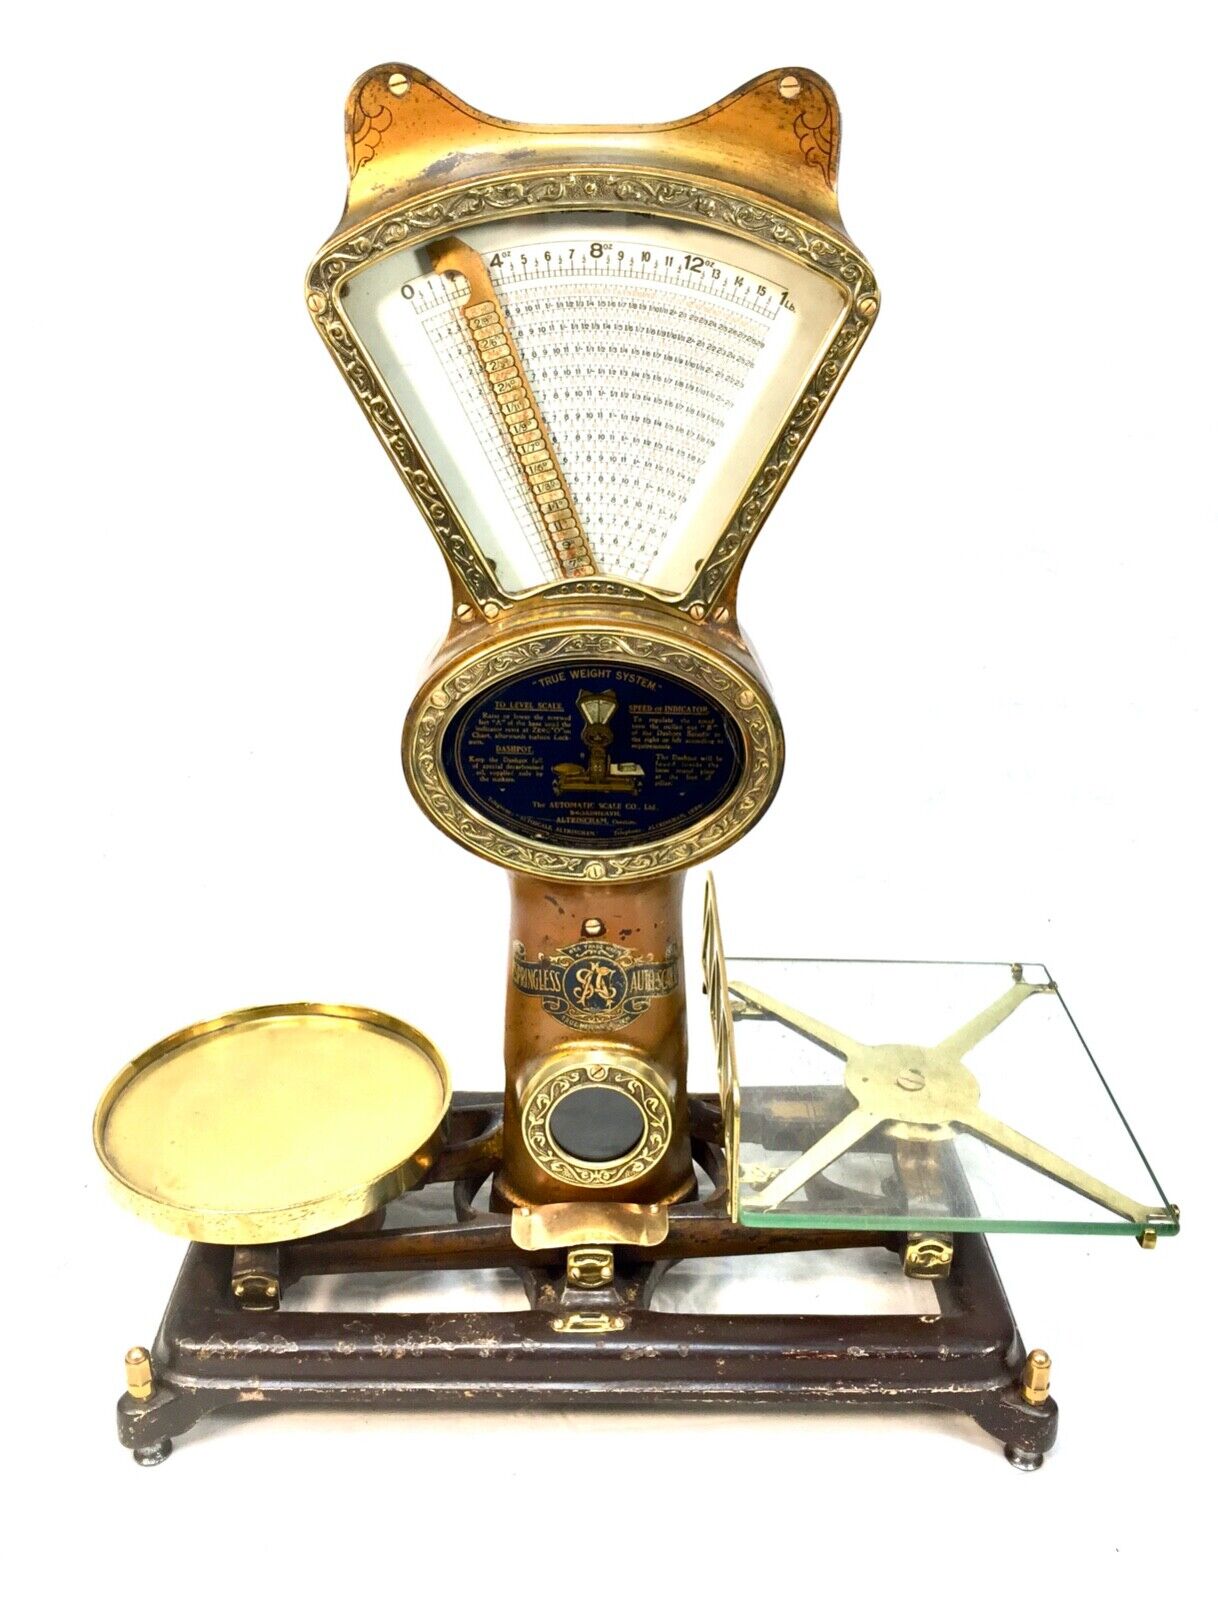 Antique Large Shop Used Scales by The Automatic Scale Company Ltd / Brass c.1900